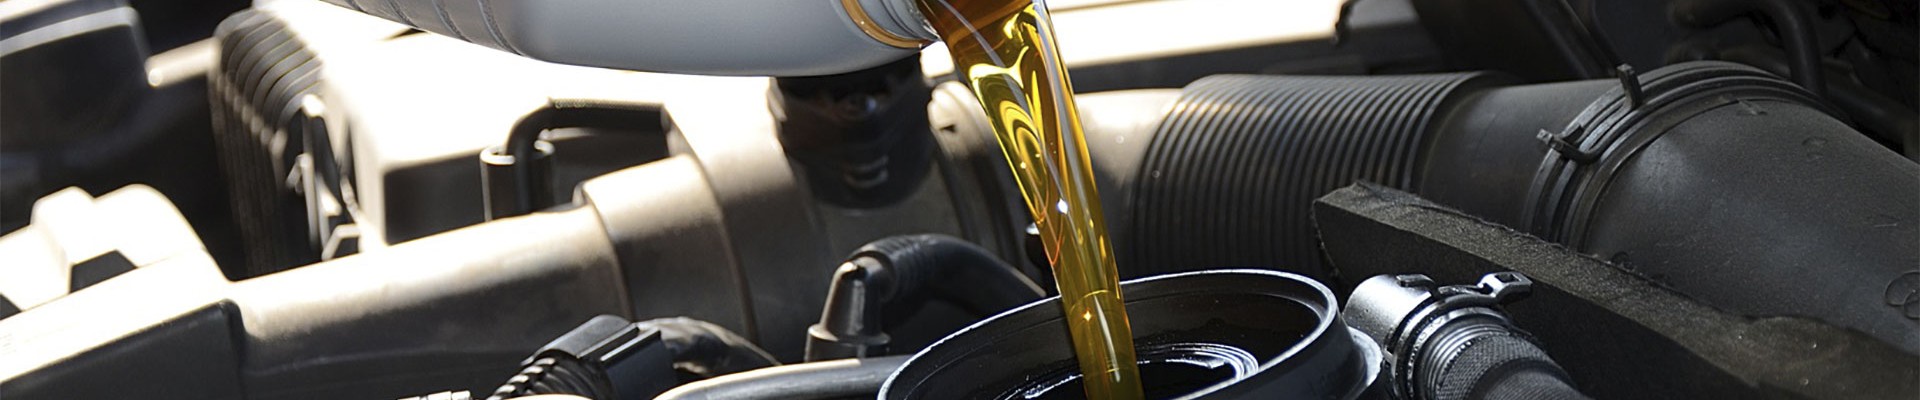 New gold-colored motor oil poured into a car engine